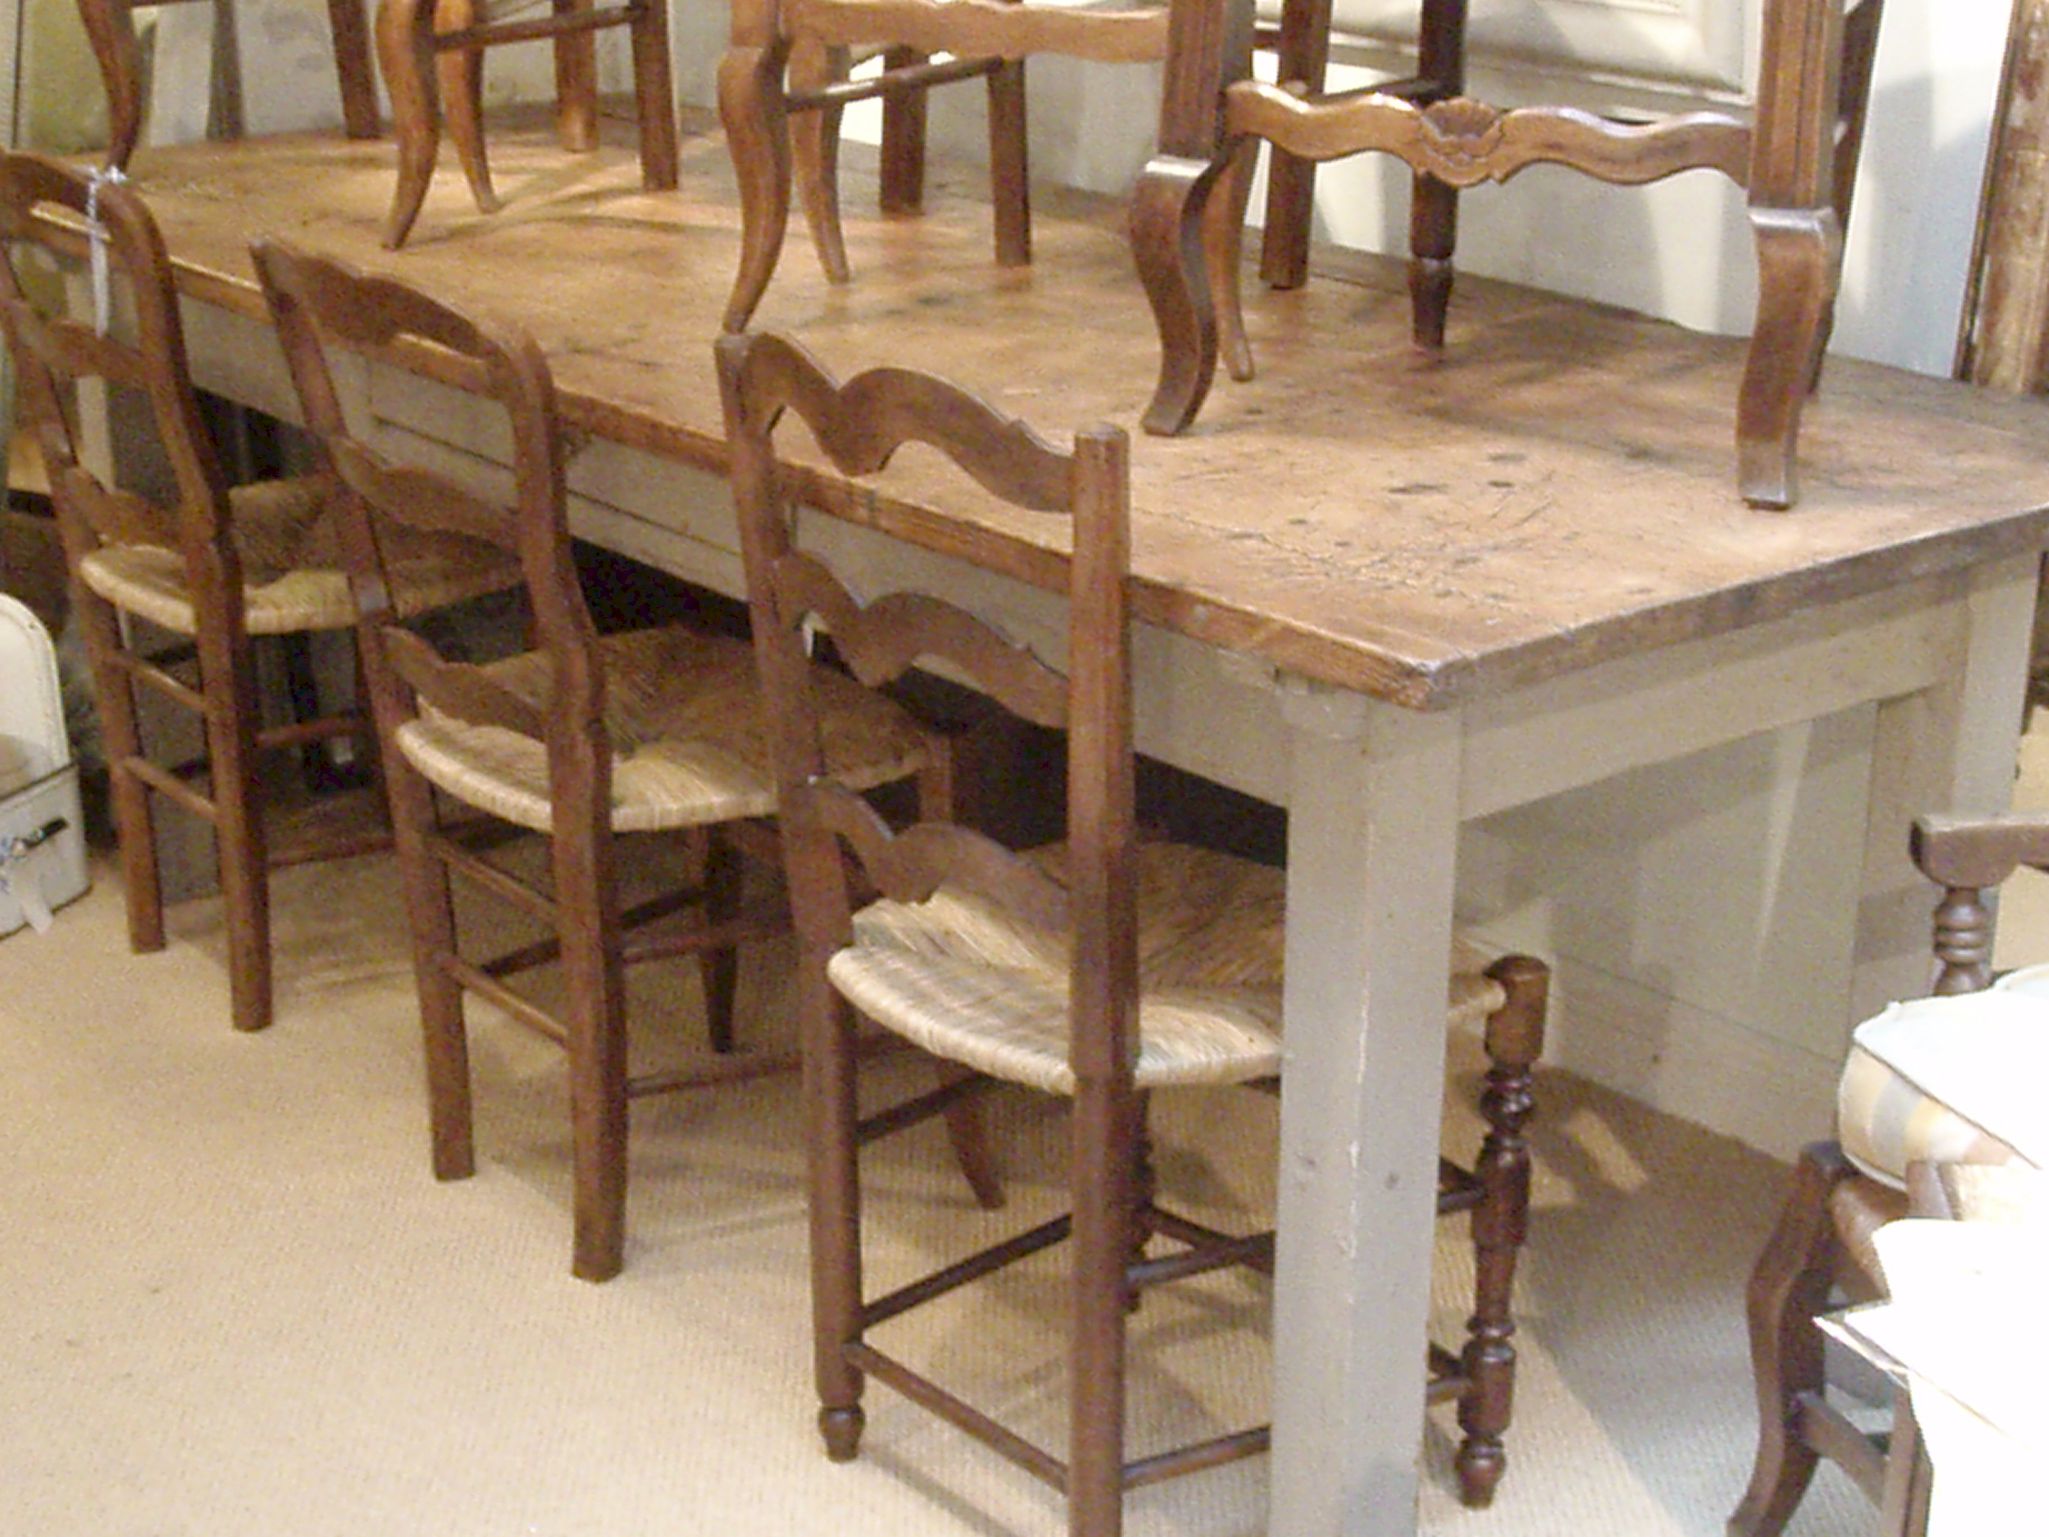 Farmhouse Kitchen Table And Chairs photo - 1